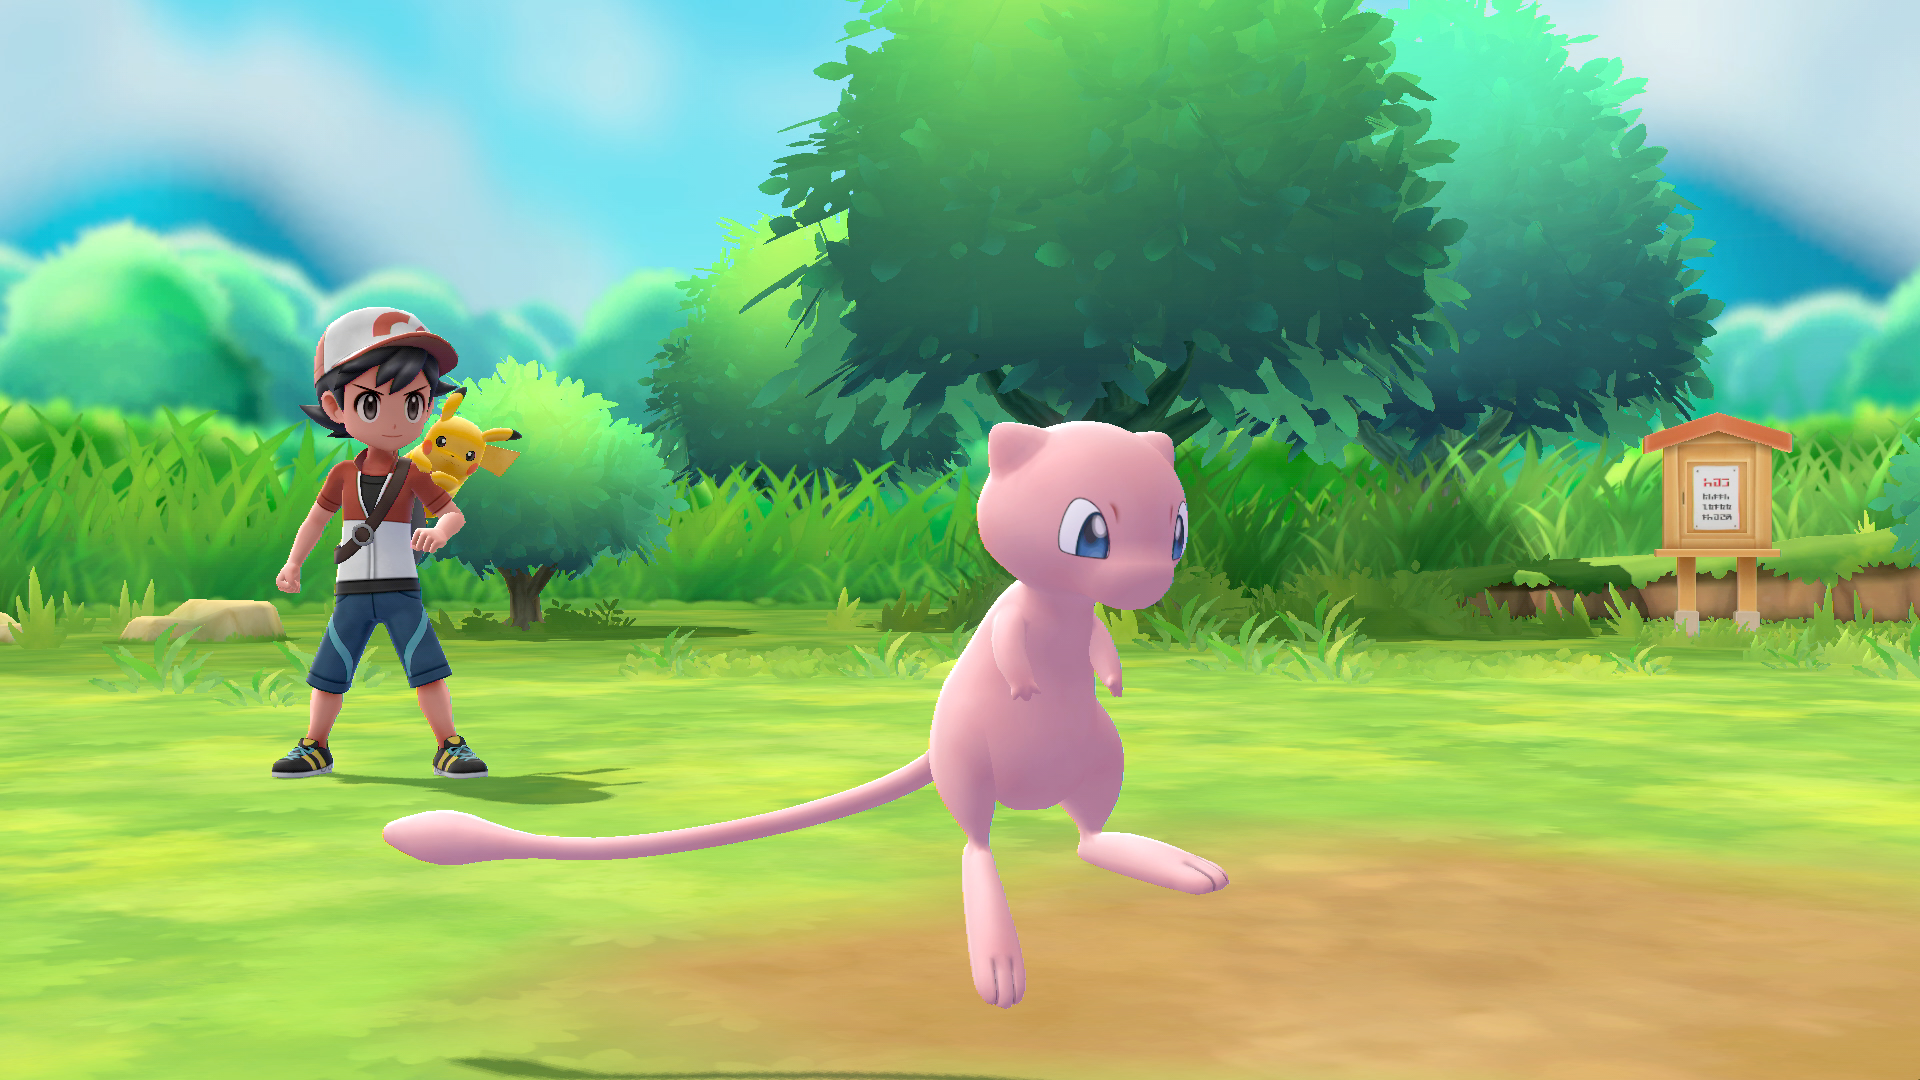 Pokémon Let's Go Pikachu and Let's Go Eevee  How Pokémon's first Switch  outing is looking to catch 'em all